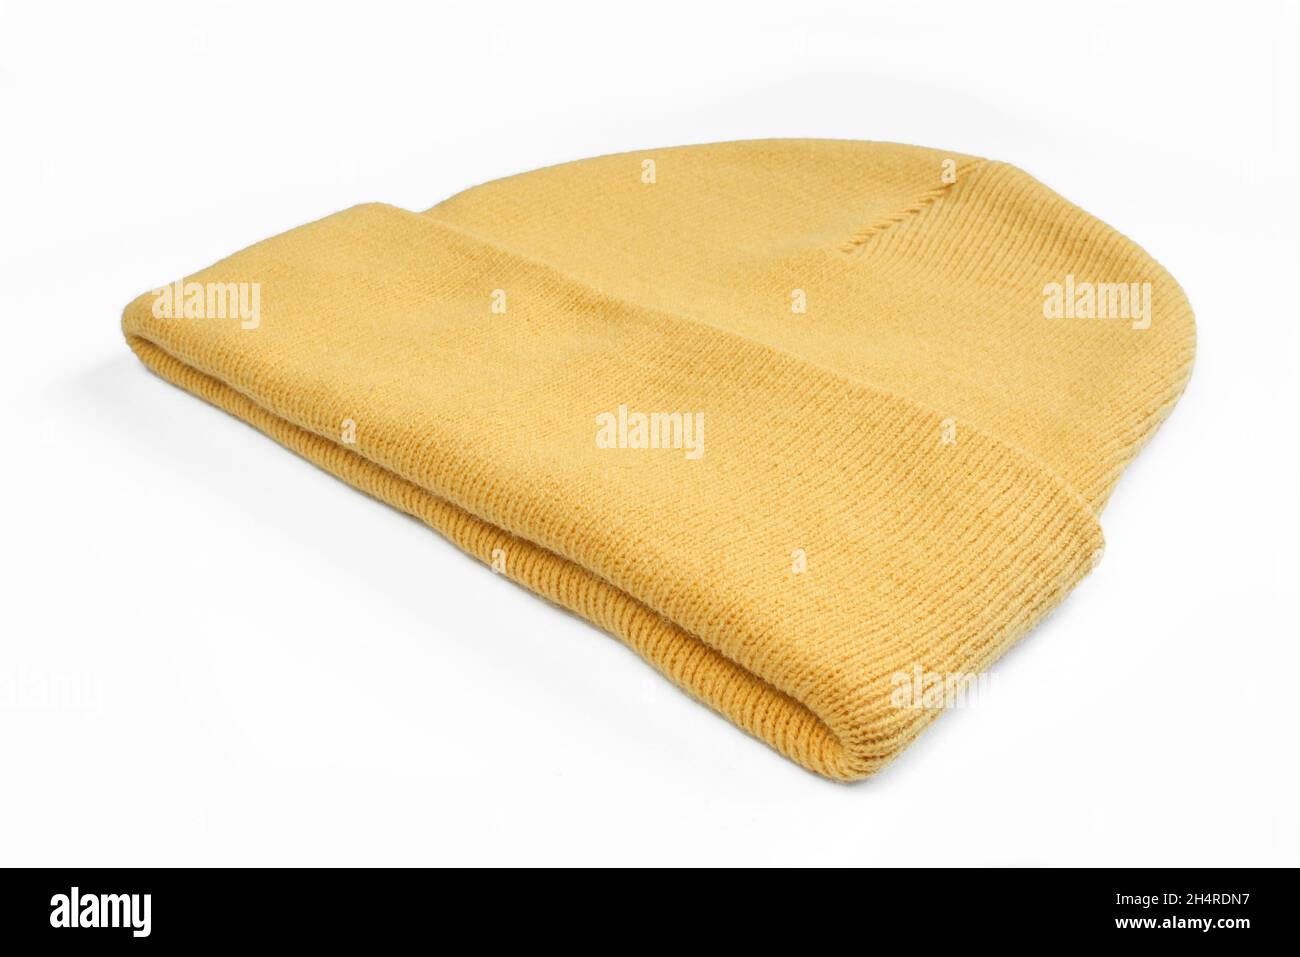 Blank orange winter hat for men isolated on white background. Classic woolen beanie Stock Photo